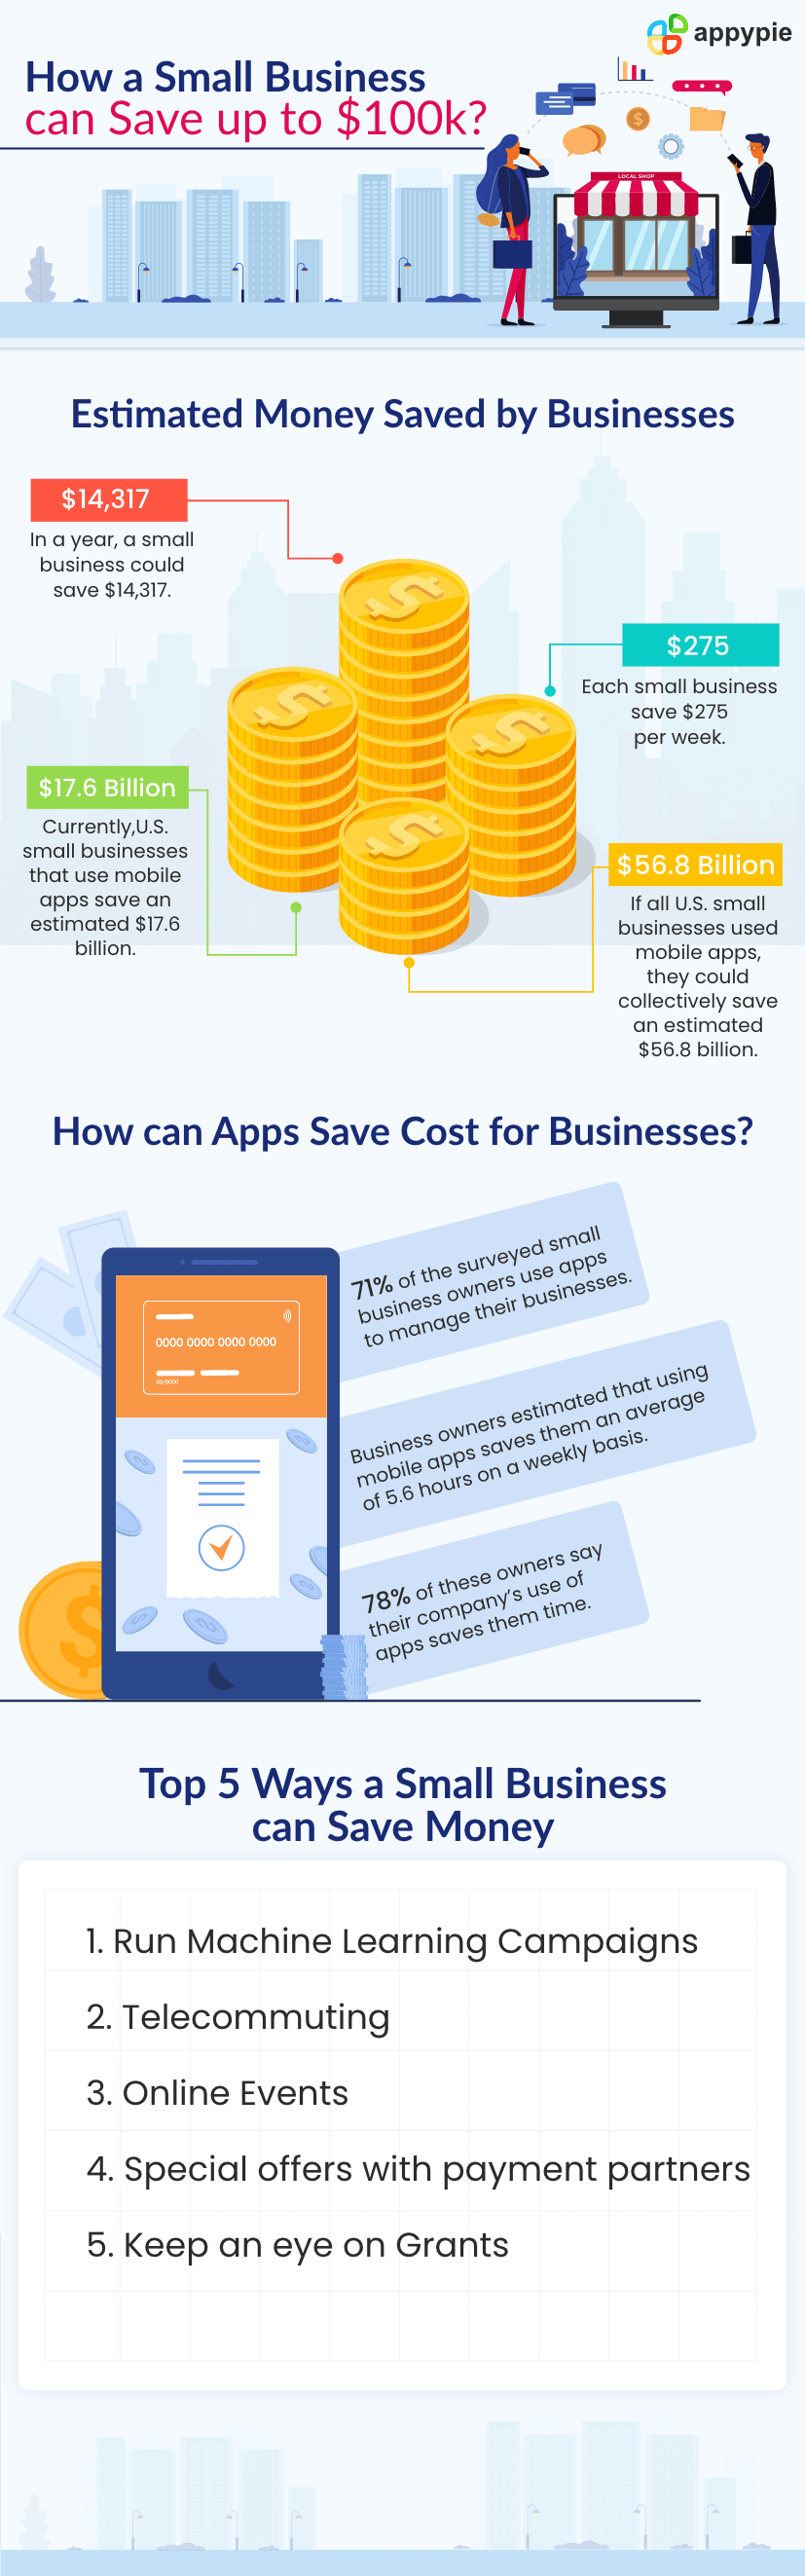 How a Small Business can Save up to $100k - Appy Pie